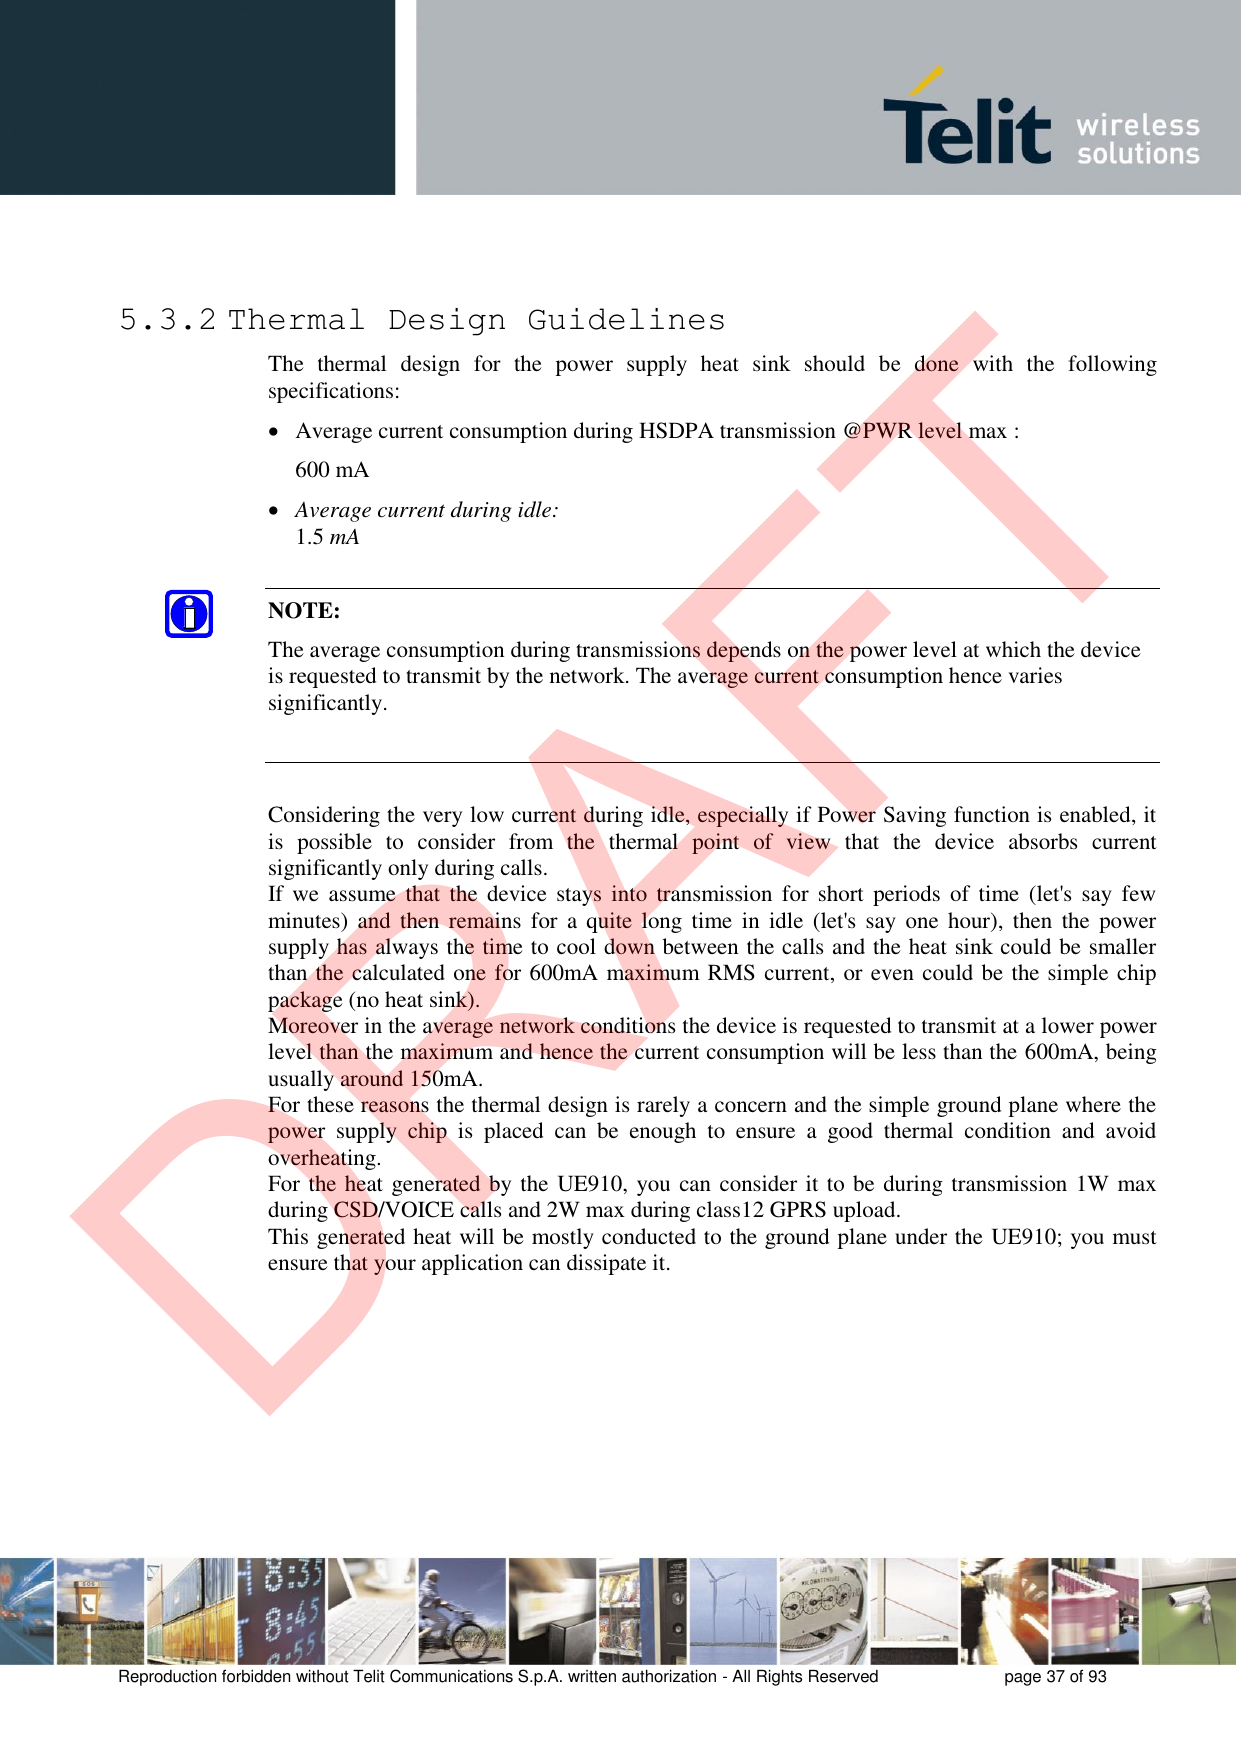 Reproduction forbidden without Telit Communications S.p.A. written authorization - All Rights Reserved  page 37 of 93 5.3.2 Thermal Design Guidelines The  thermal  design  for  the  power  supply  heat  sink  should  be  done  with  the  following specifications: Average current consumption during HSDPA transmission @PWR level max :600 mAAverage current during idle:1.5 mANOTE: The average consumption during transmissions depends on the power level at which the device is requested to transmit by the network. The average current consumption hence varies significantly. Considering the very low current during idle, especially if Power Saving function is enabled, it is  possible  to  consider  from  the  thermal  point  of  view  that  the  device  absorbs  current significantly only during calls.  If we  assume  that  the  device stays  into  transmission for short  periods  of time  (let&apos;s  say few minutes) and  then remains  for  a quite  long time  in idle  (let&apos;s say  one  hour),  then the  power supply has always the time to cool down between the calls and the heat sink could be smaller than the calculated one for 600mA maximum RMS current, or even could be the simple chip package (no heat sink). Moreover in the average network conditions the device is requested to transmit at a lower power level than the maximum and hence the current consumption will be less than the 600mA, being usually around 150mA. For these reasons the thermal design is rarely a concern and the simple ground plane where the power  supply  chip  is  placed  can  be  enough  to  ensure  a  good  thermal  condition  and  avoid overheating.  For the heat generated by the UE910, you can consider it to be during transmission 1W max during CSD/VOICE calls and 2W max during class12 GPRS upload.  This generated heat will be mostly conducted to the ground plane under the UE910; you must ensure that your application can dissipate it. DRAFT